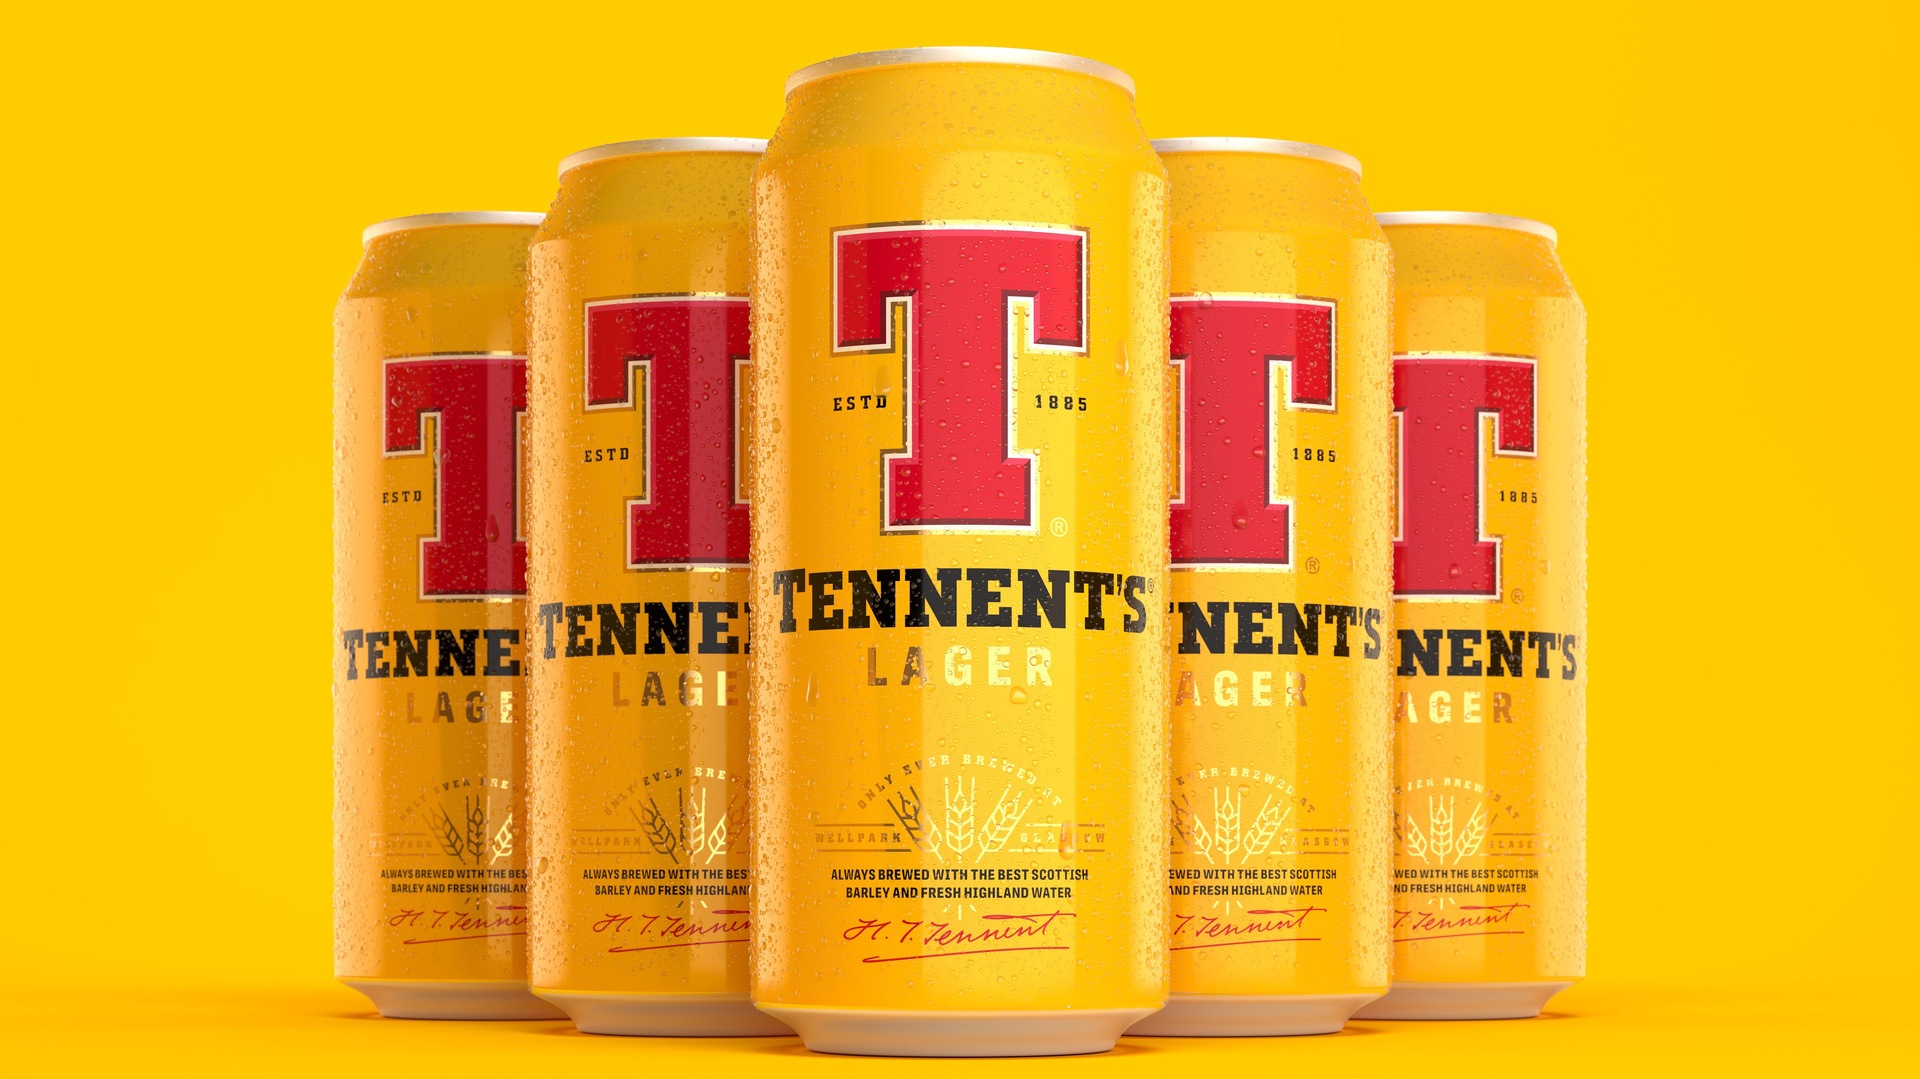 New-look Tennents cans to hit shelves